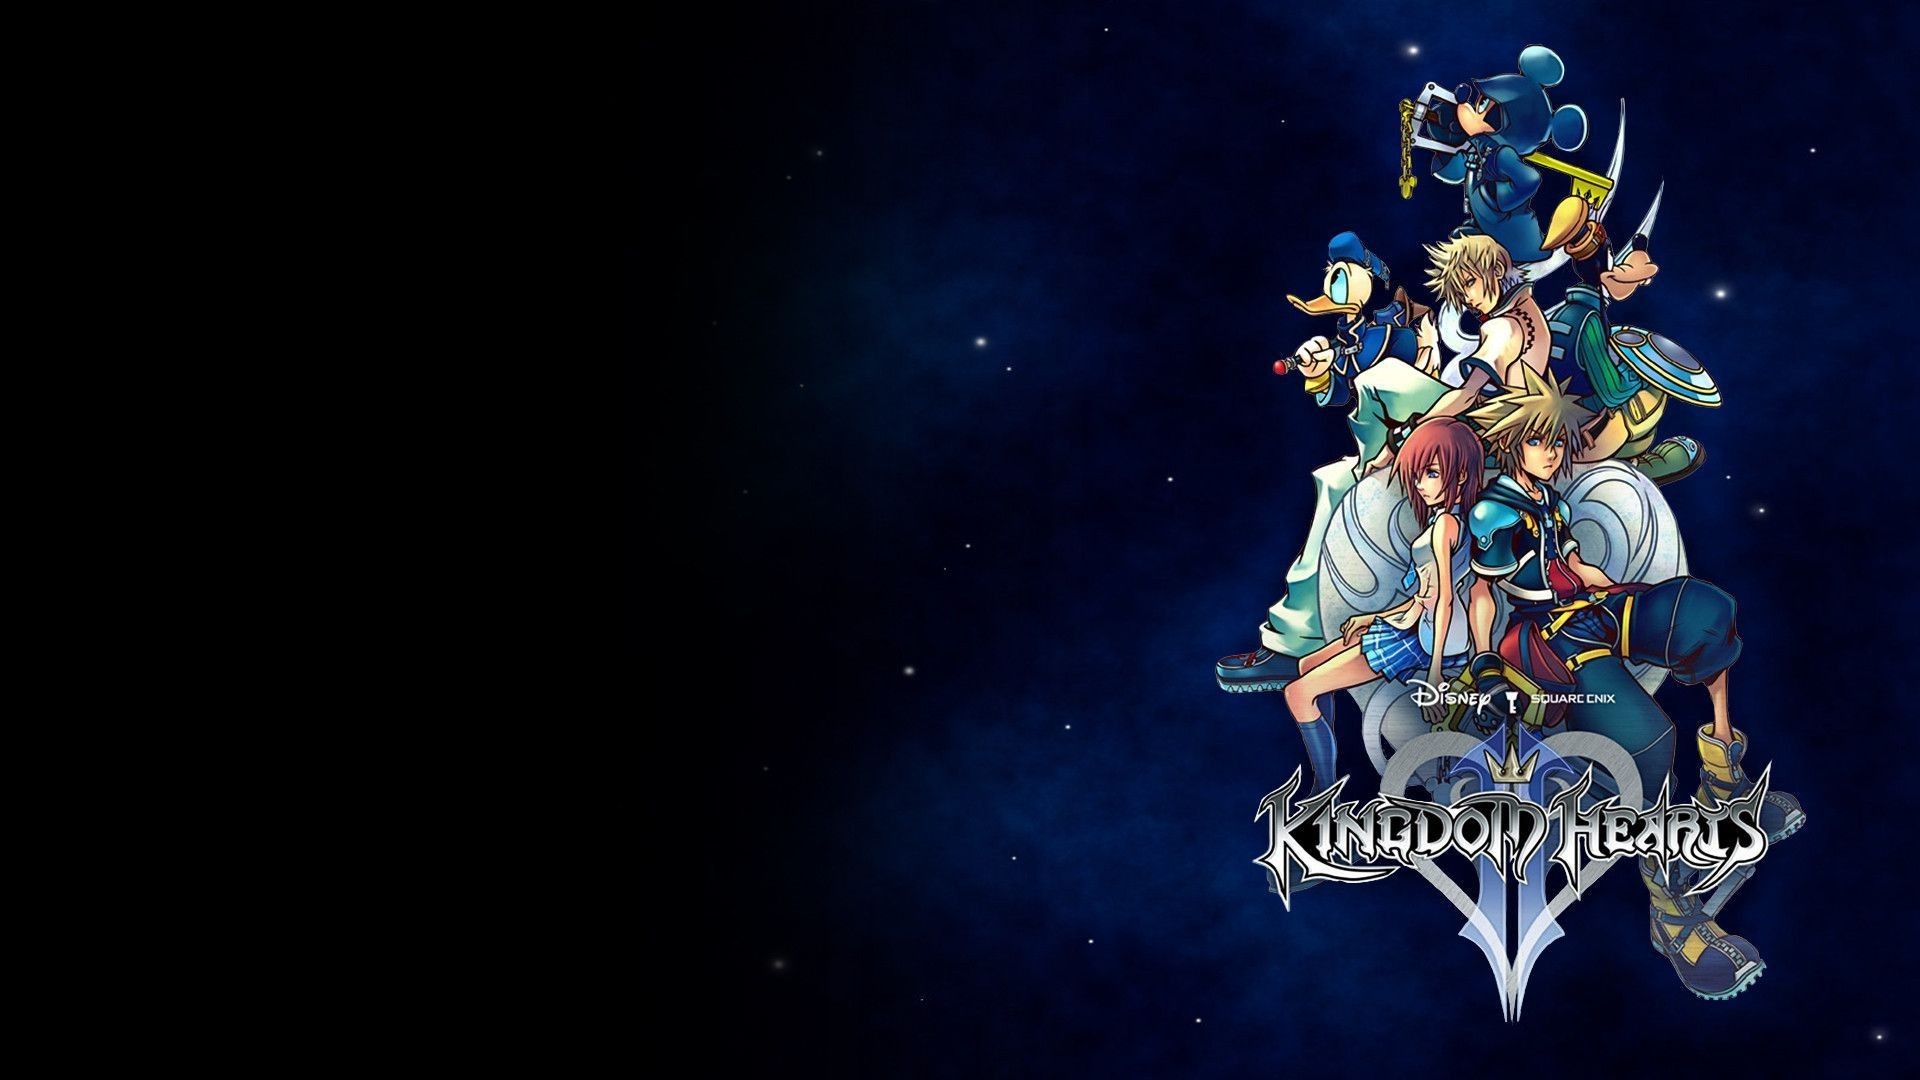 1920x1080  Wallpapers For > Kingdom Hearts 3 Wallpaper Hd  Â·  Download Â· Kingdom Hearts Wallpaper Hd ...